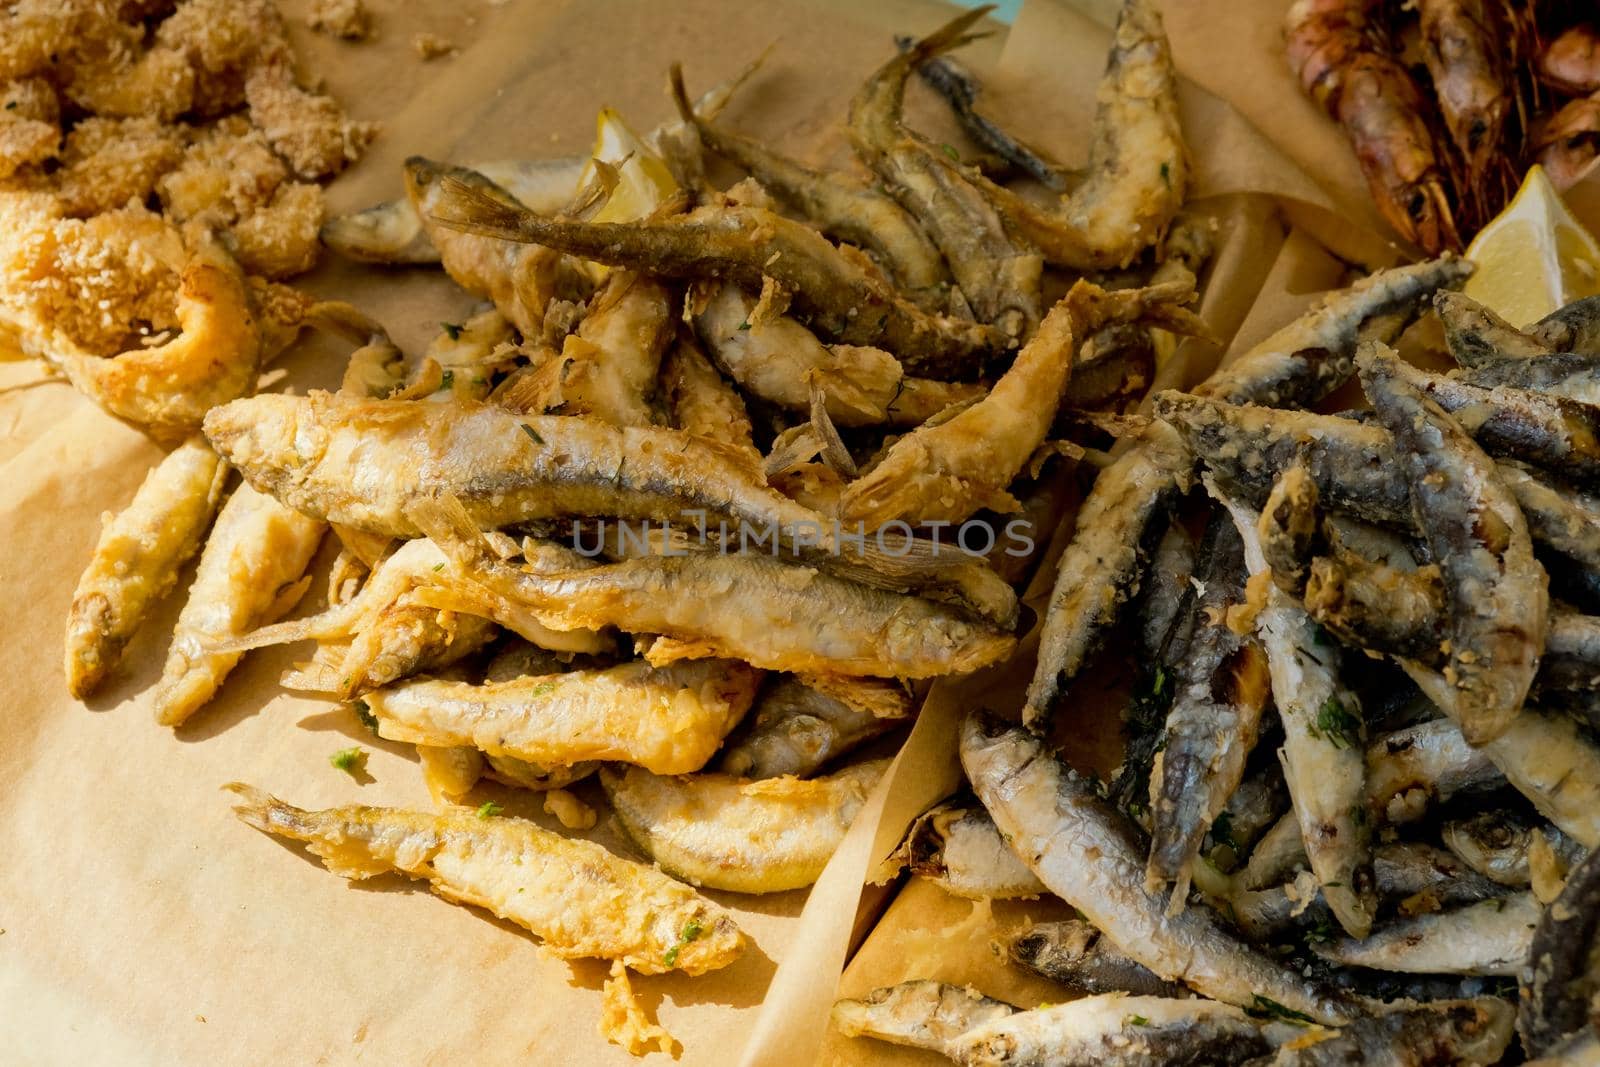 Small fried fish on the counter. Street food festival. Selective focus. Close-up.